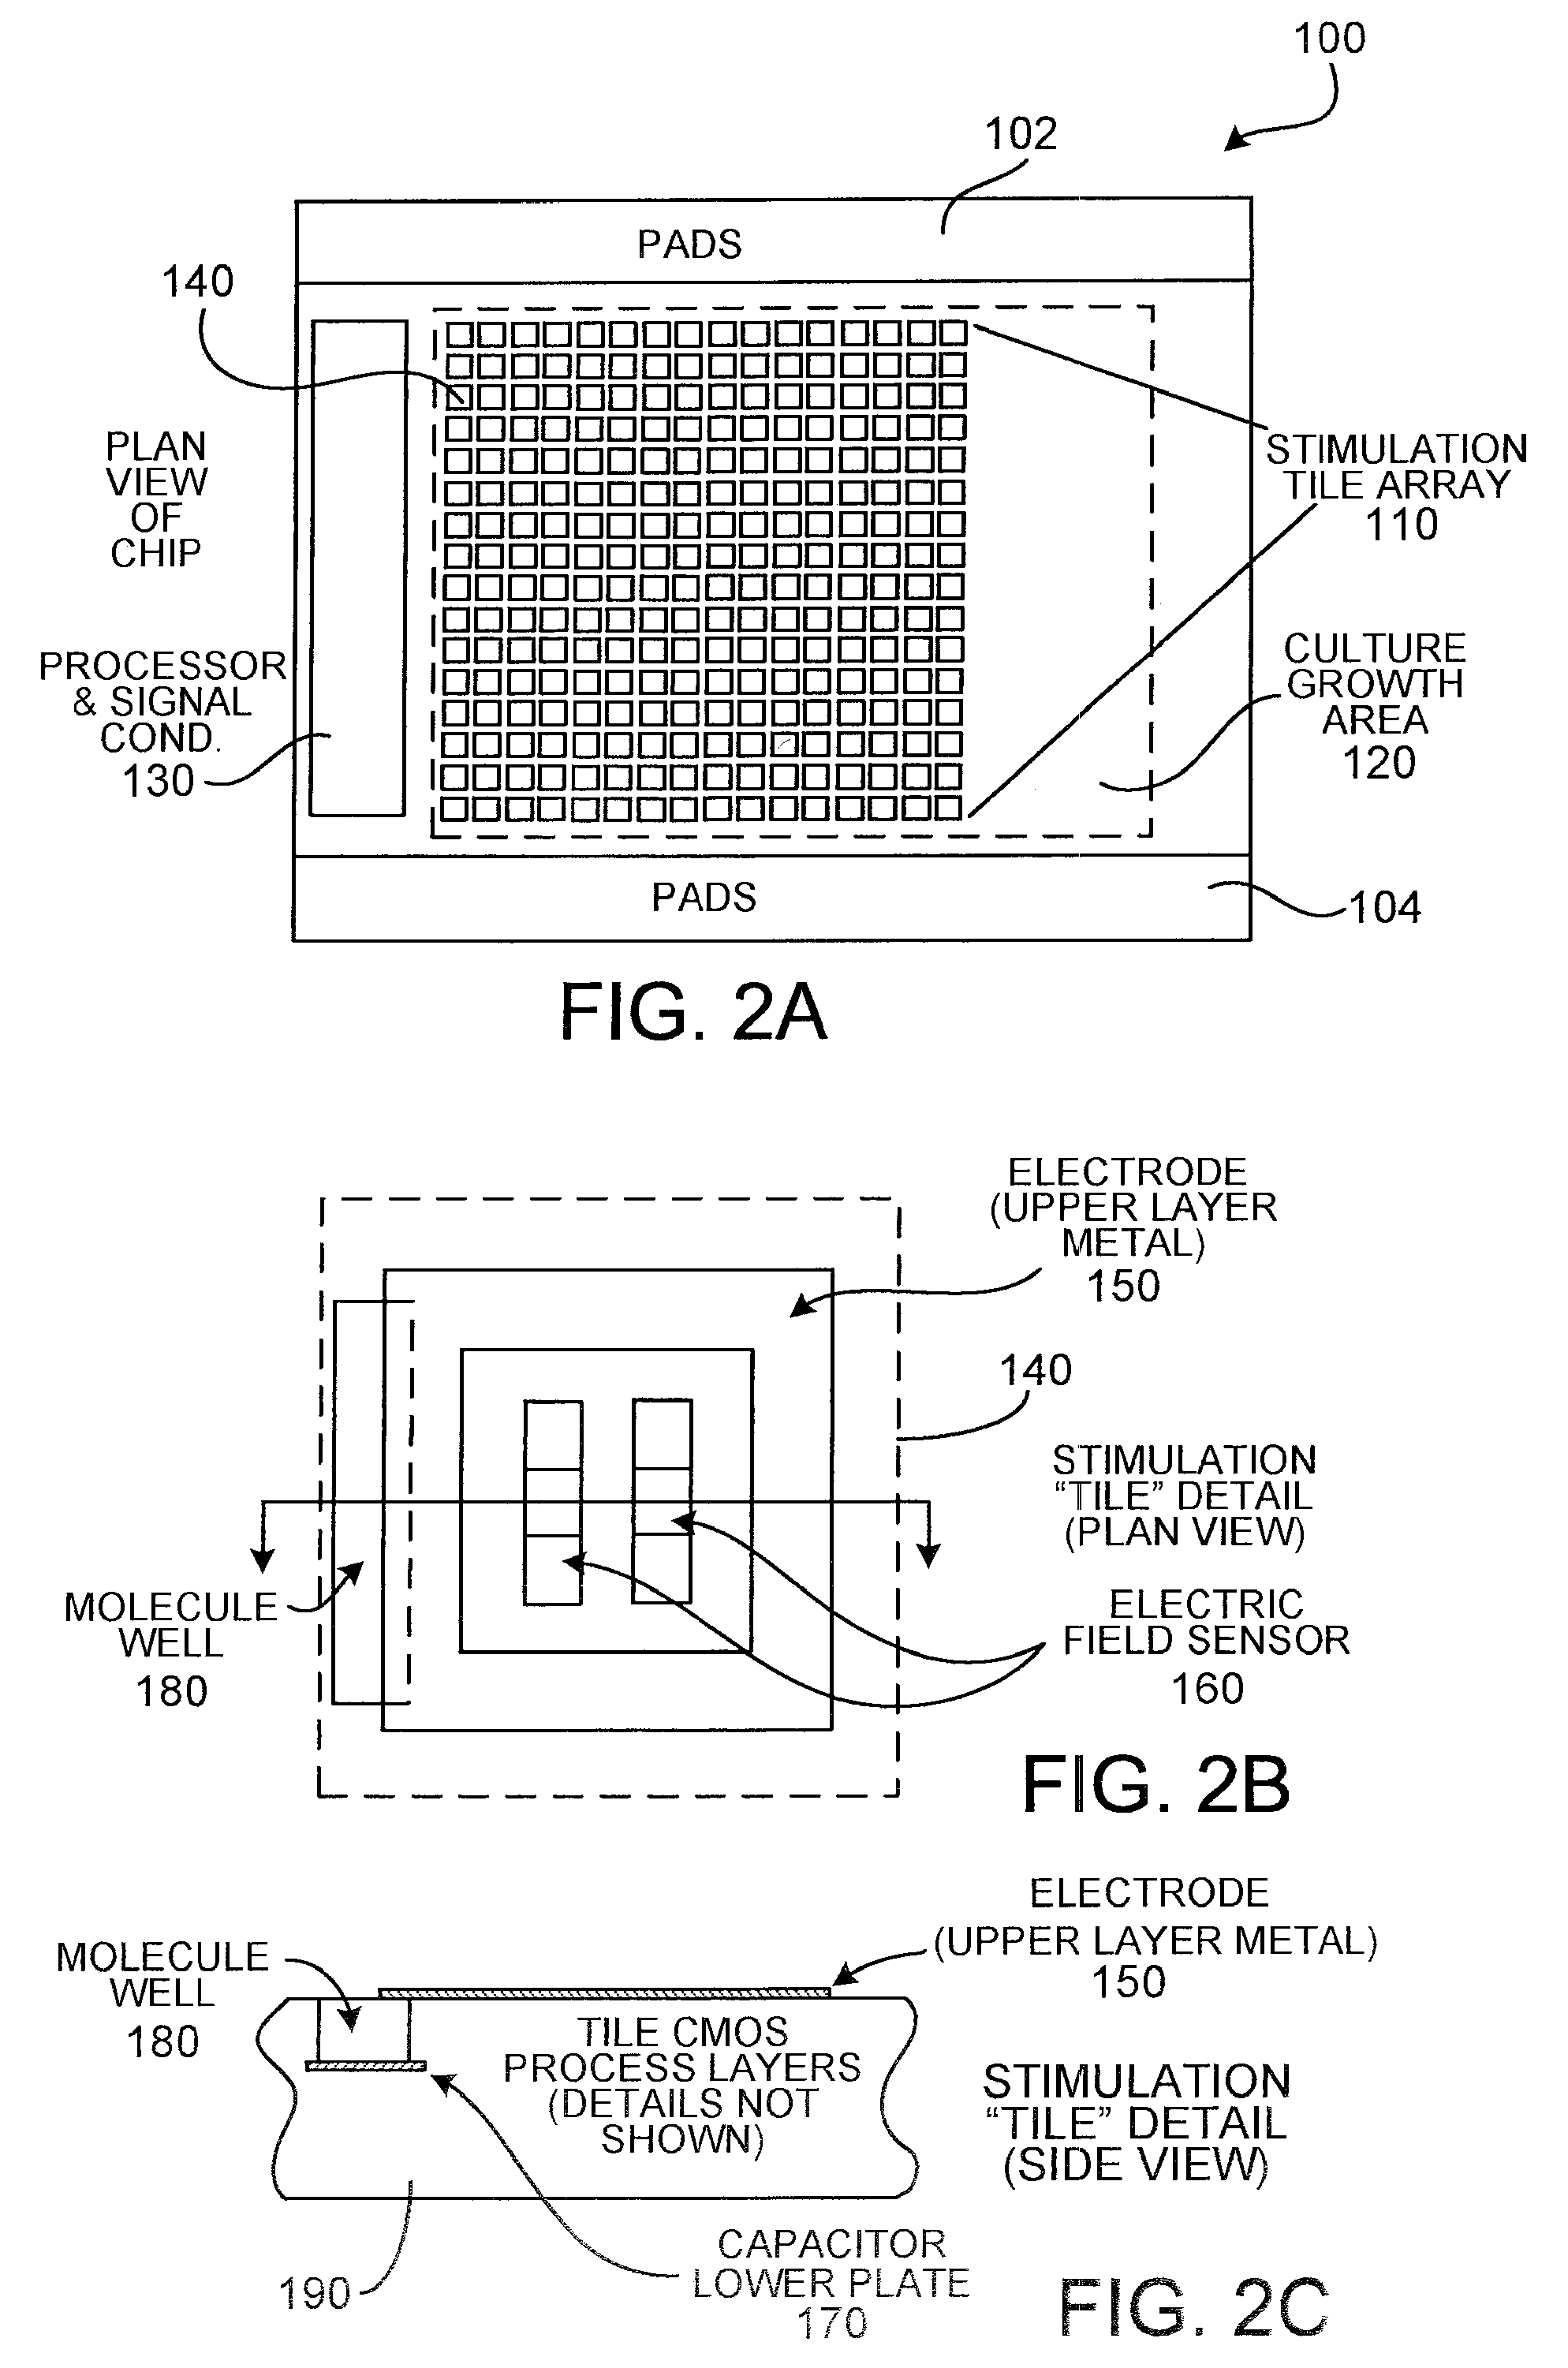 Method and apparatus for guiding growth of neurons